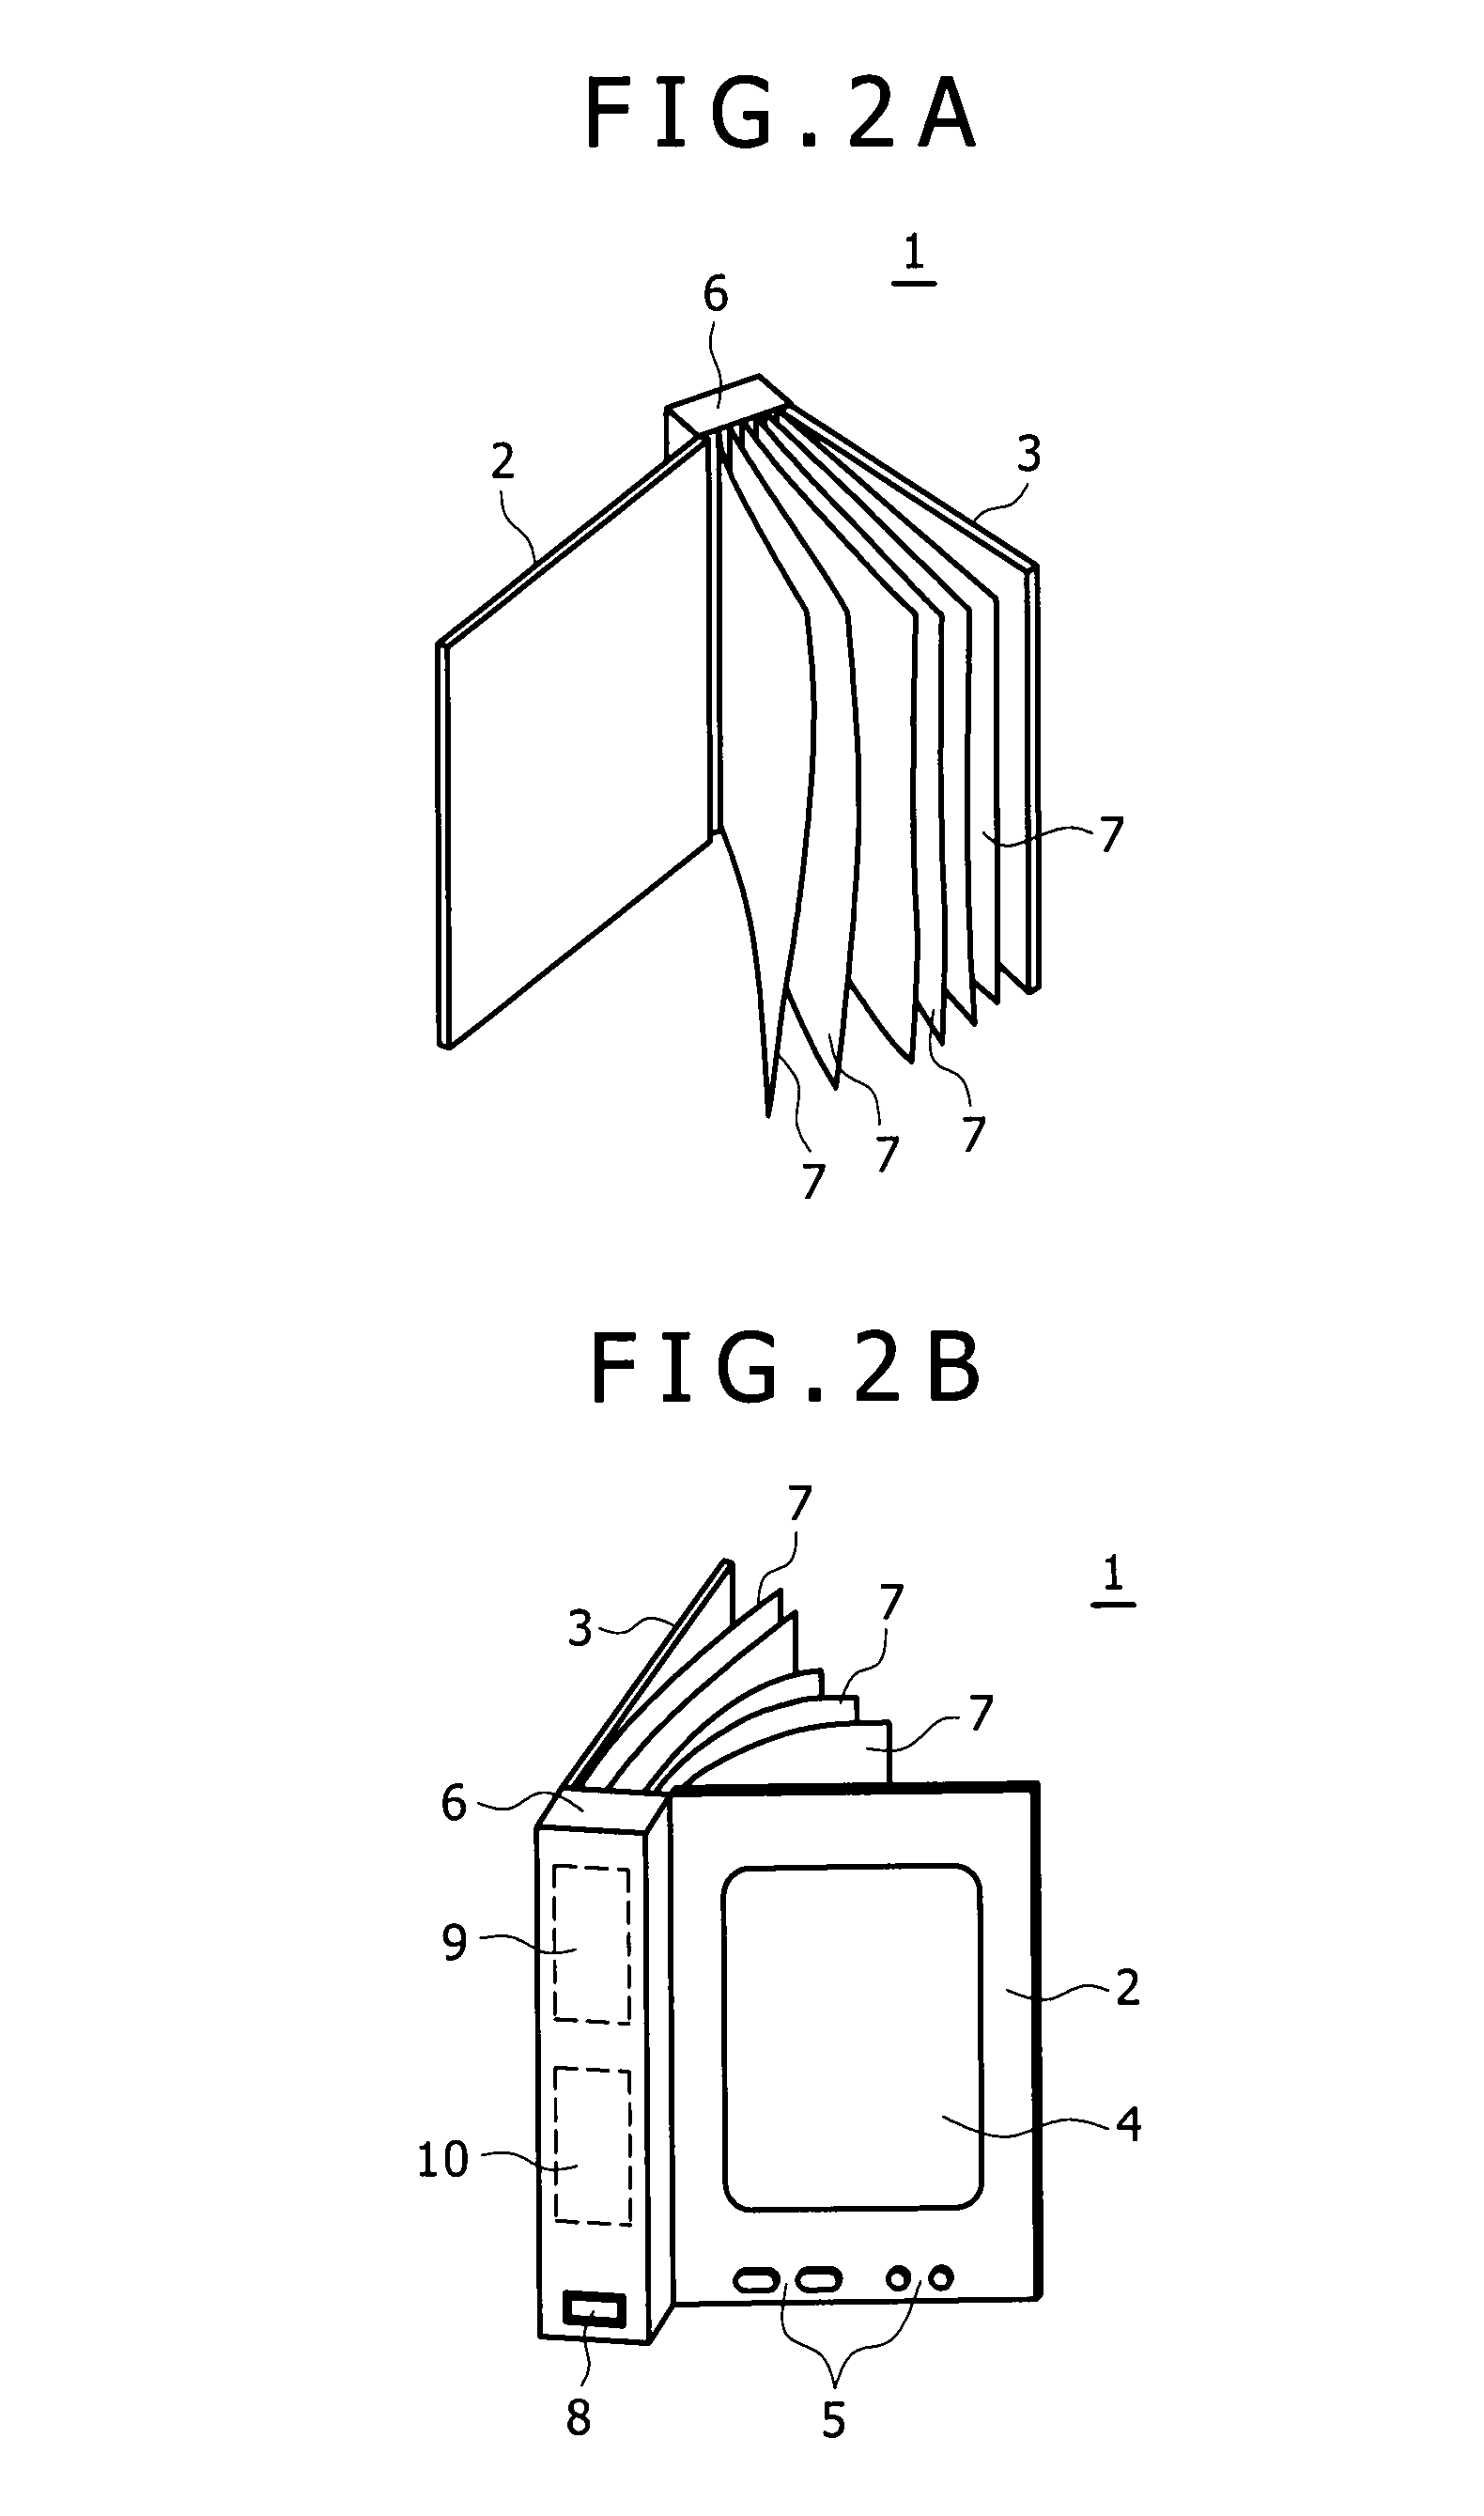 Book-shaped display apparatus and method of editing video using book-shaped display apparatus